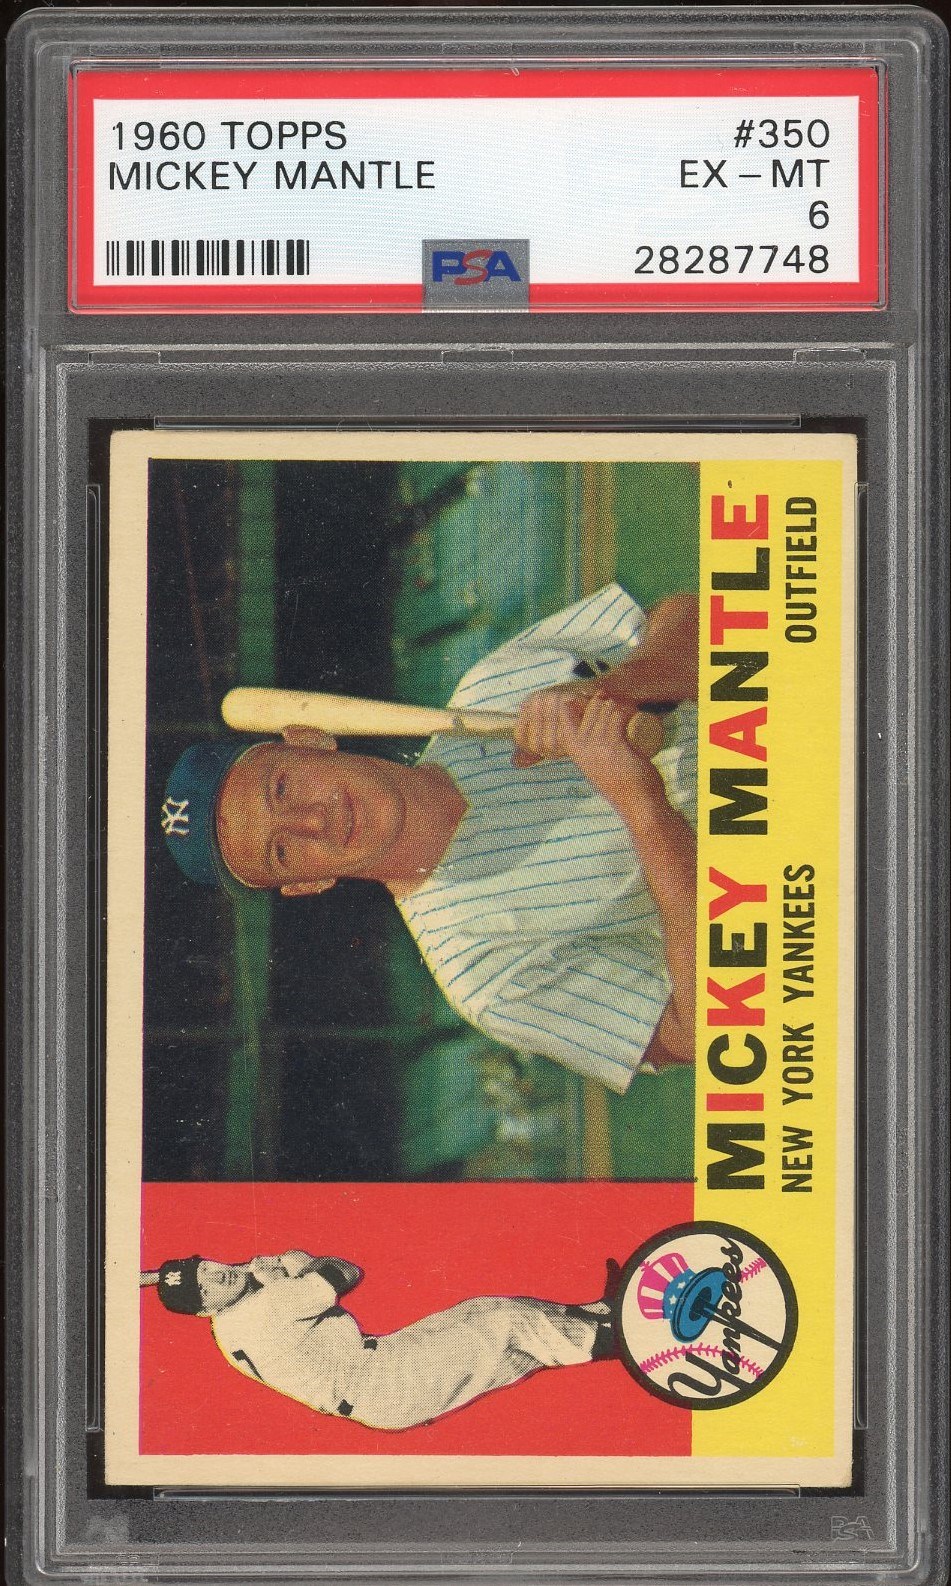 - 1960 Topps Mickey Mantle #350 EX-MT PSA Graded 6